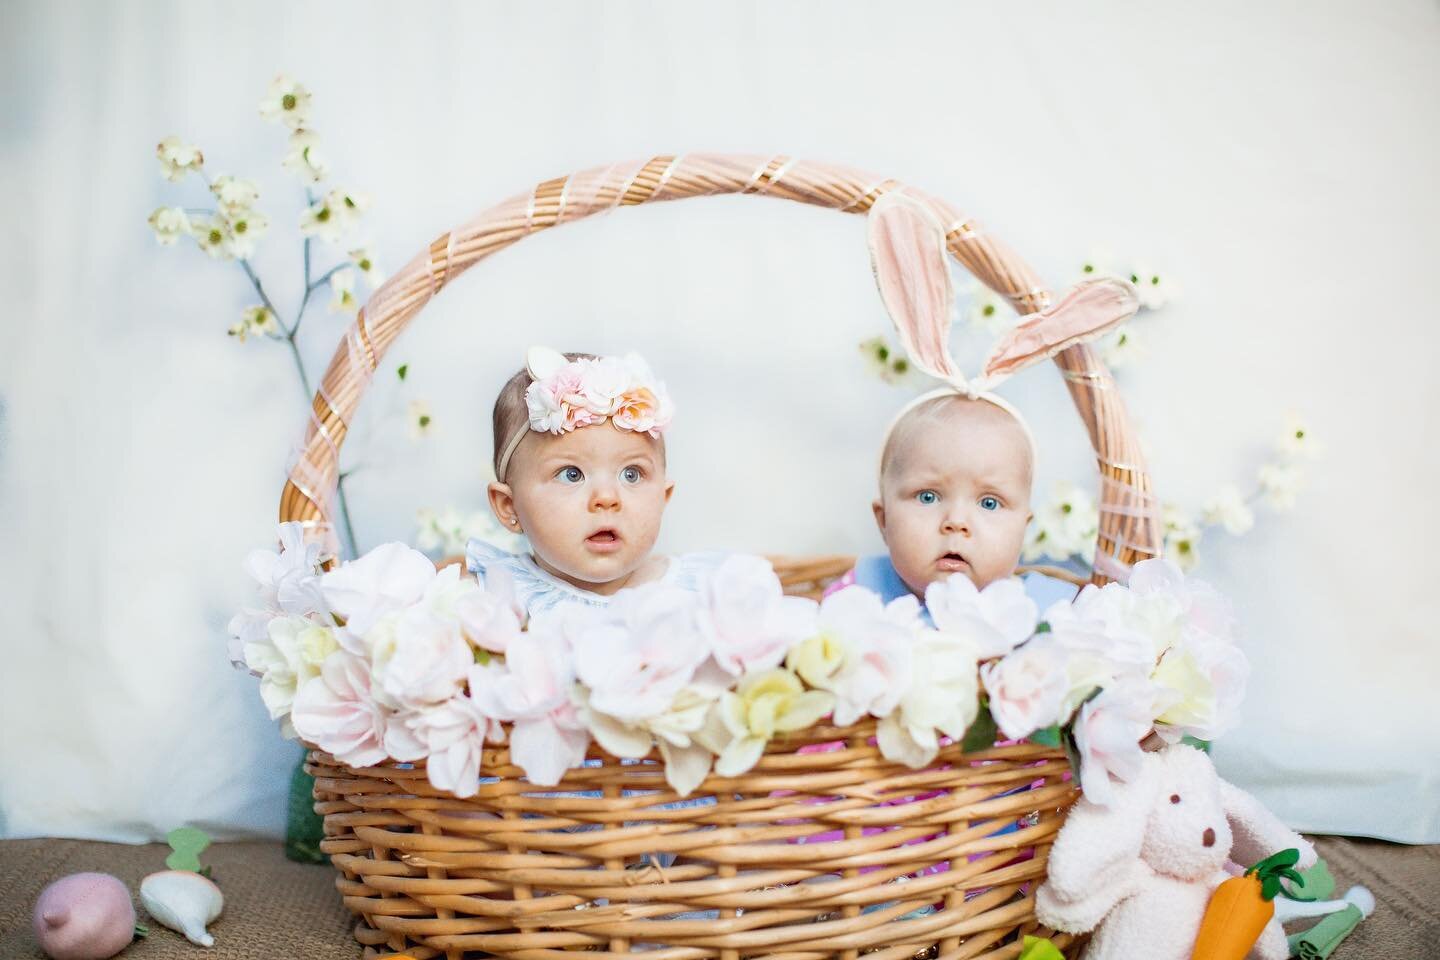 Some more favorites from this little Easter mini session 🐰 🥕